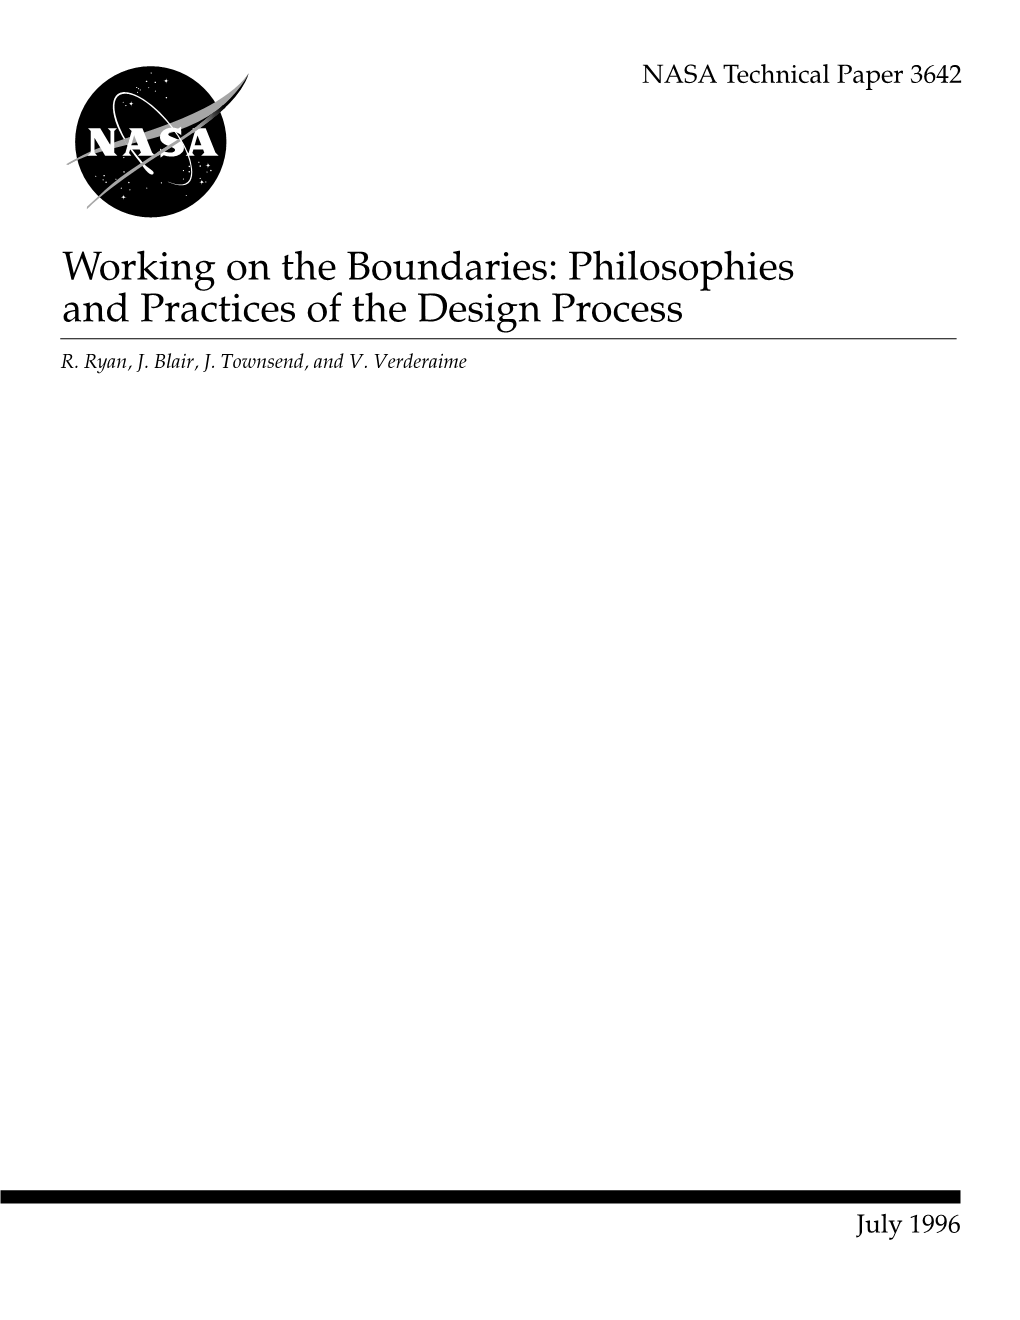 Philosophies and Practices of the Design Process